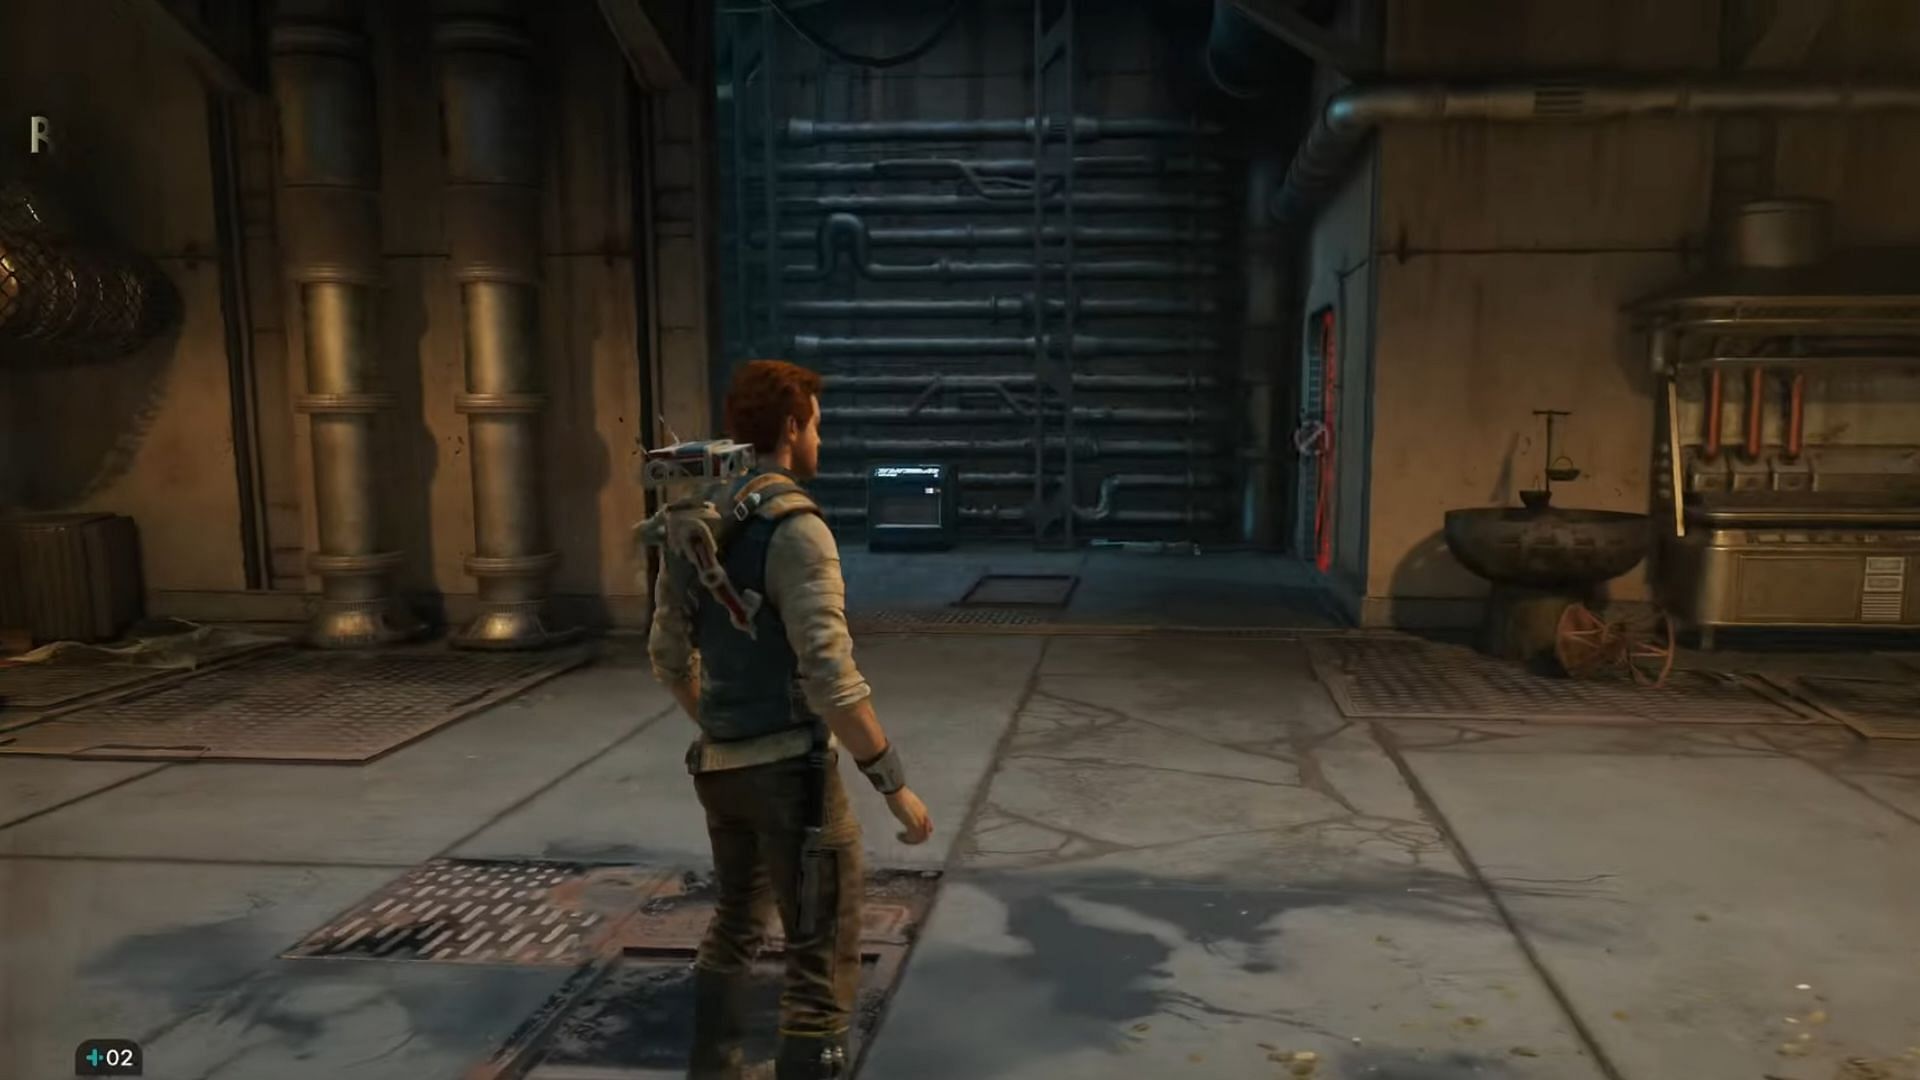 Interact with the chest beside the door to obtain the Emitter (Image via Electronic Arts)